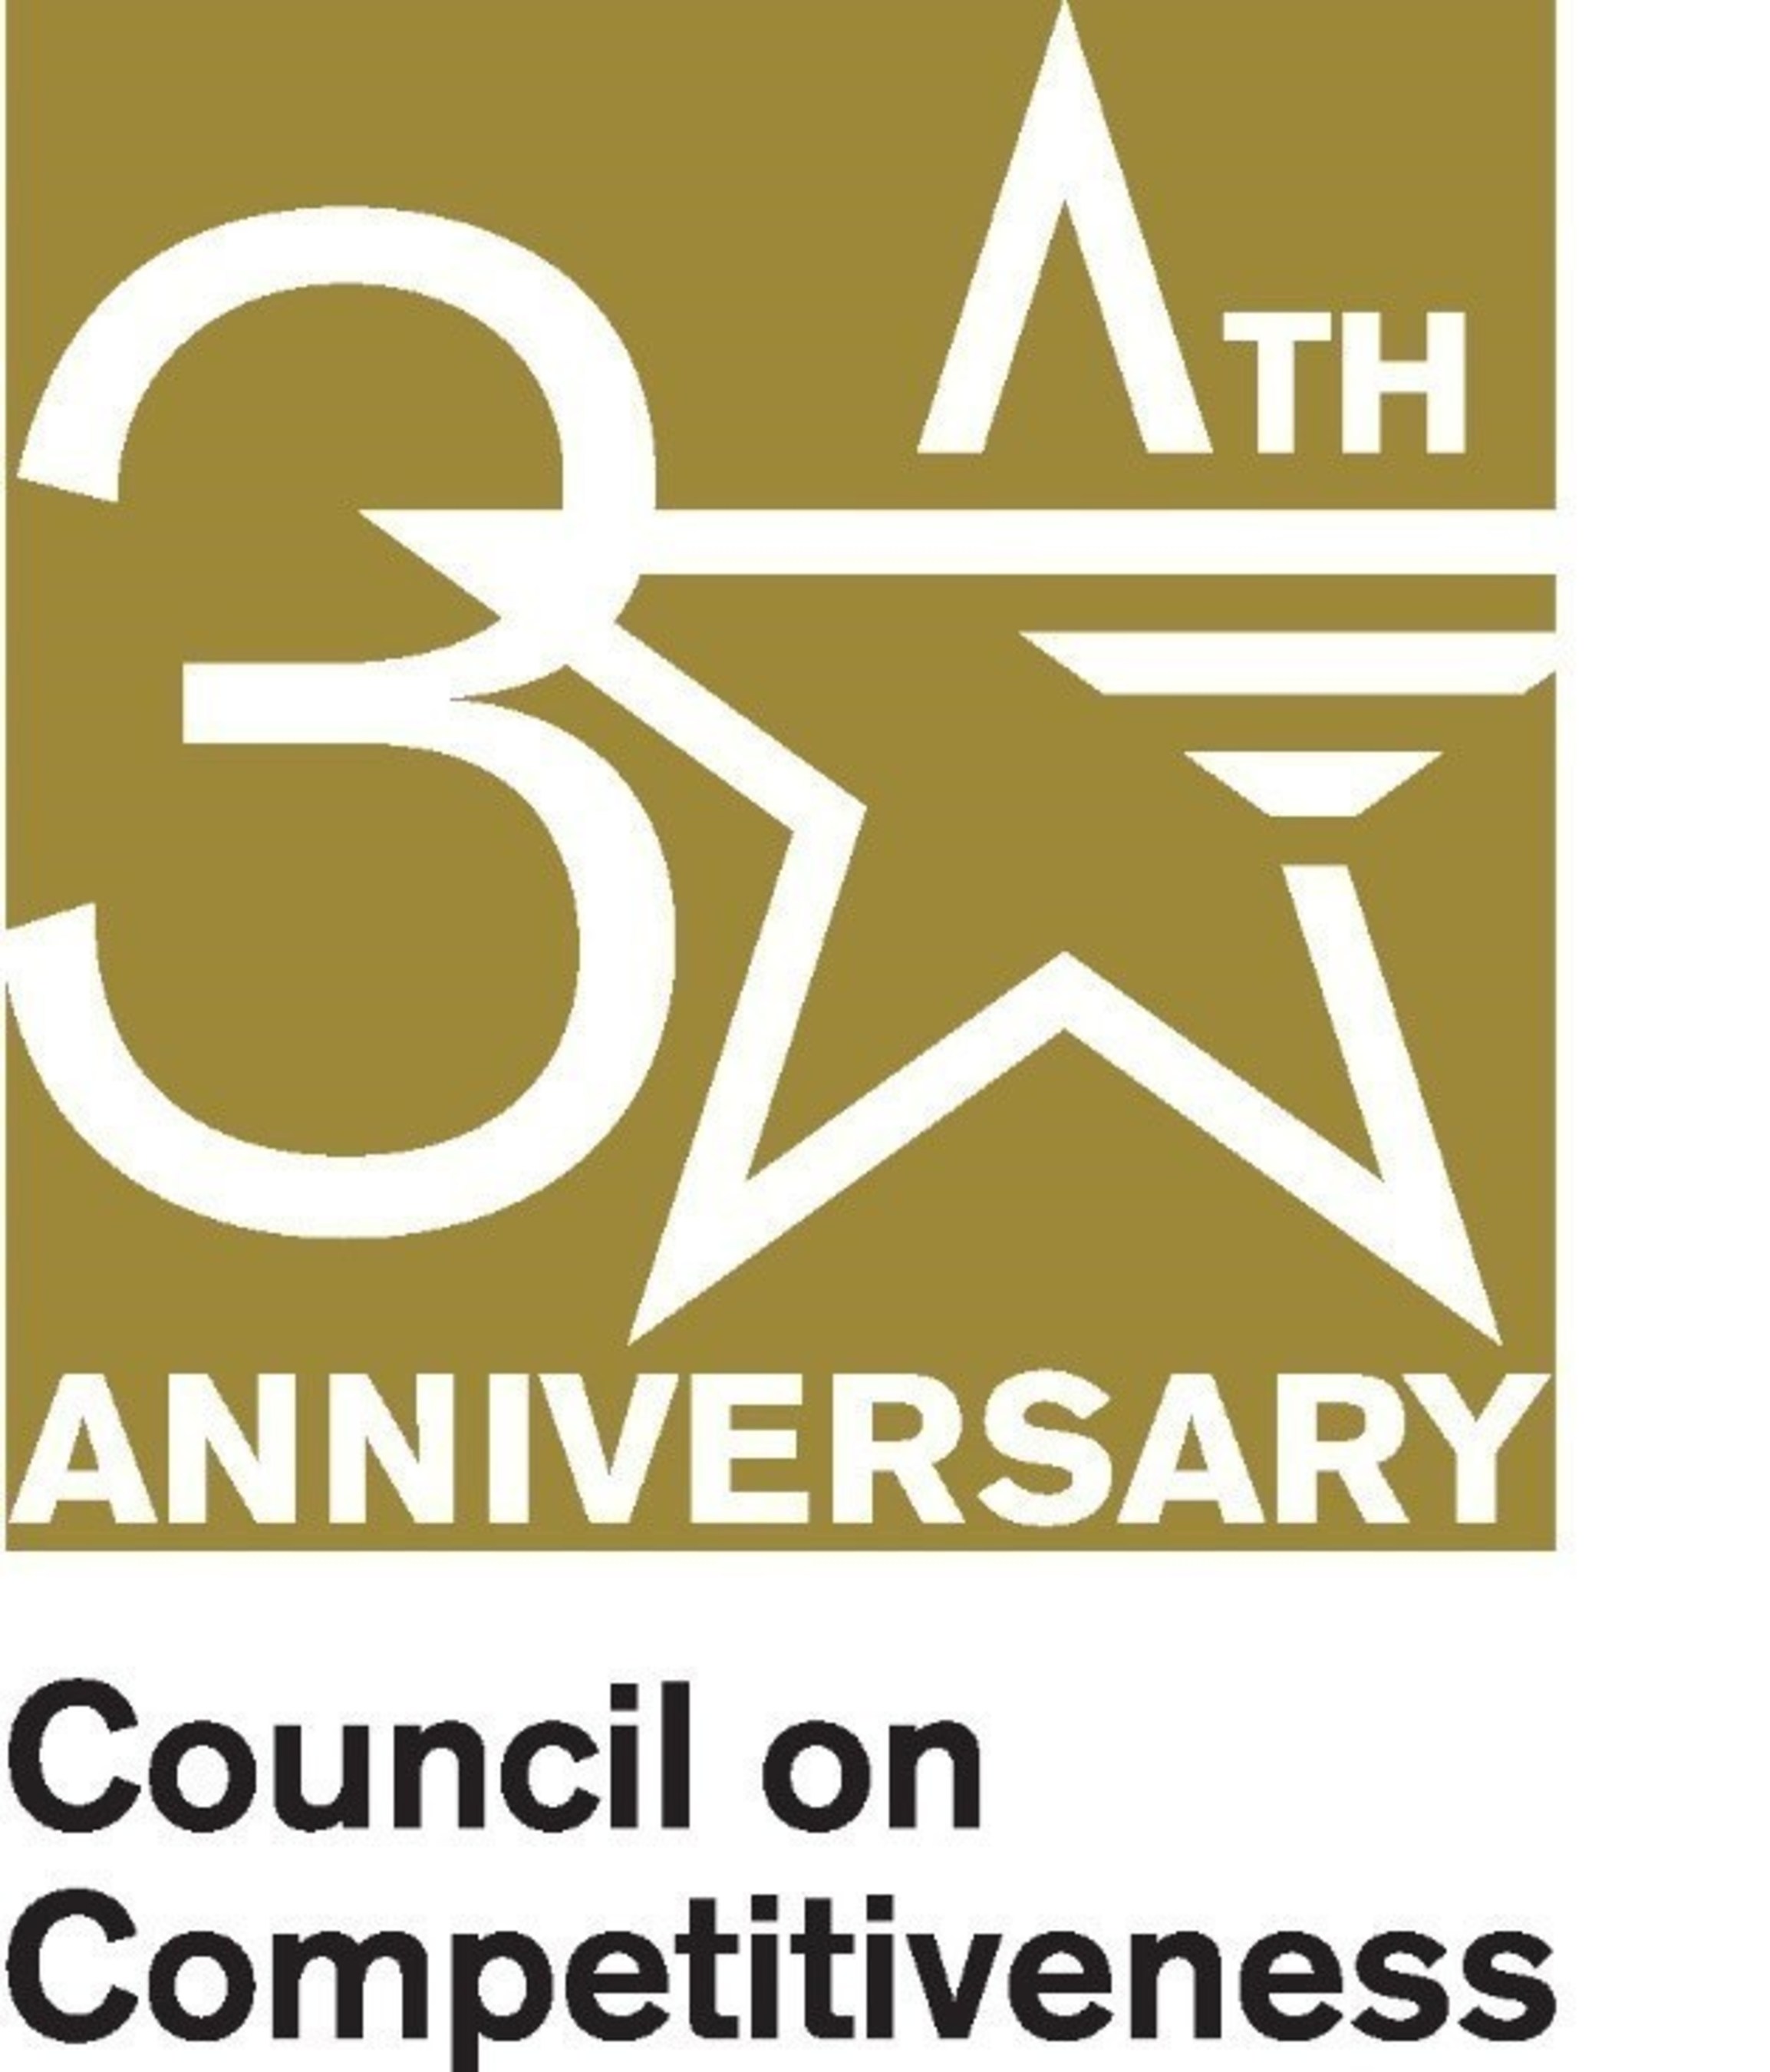 30th Anniversary - Council on Competitiveness